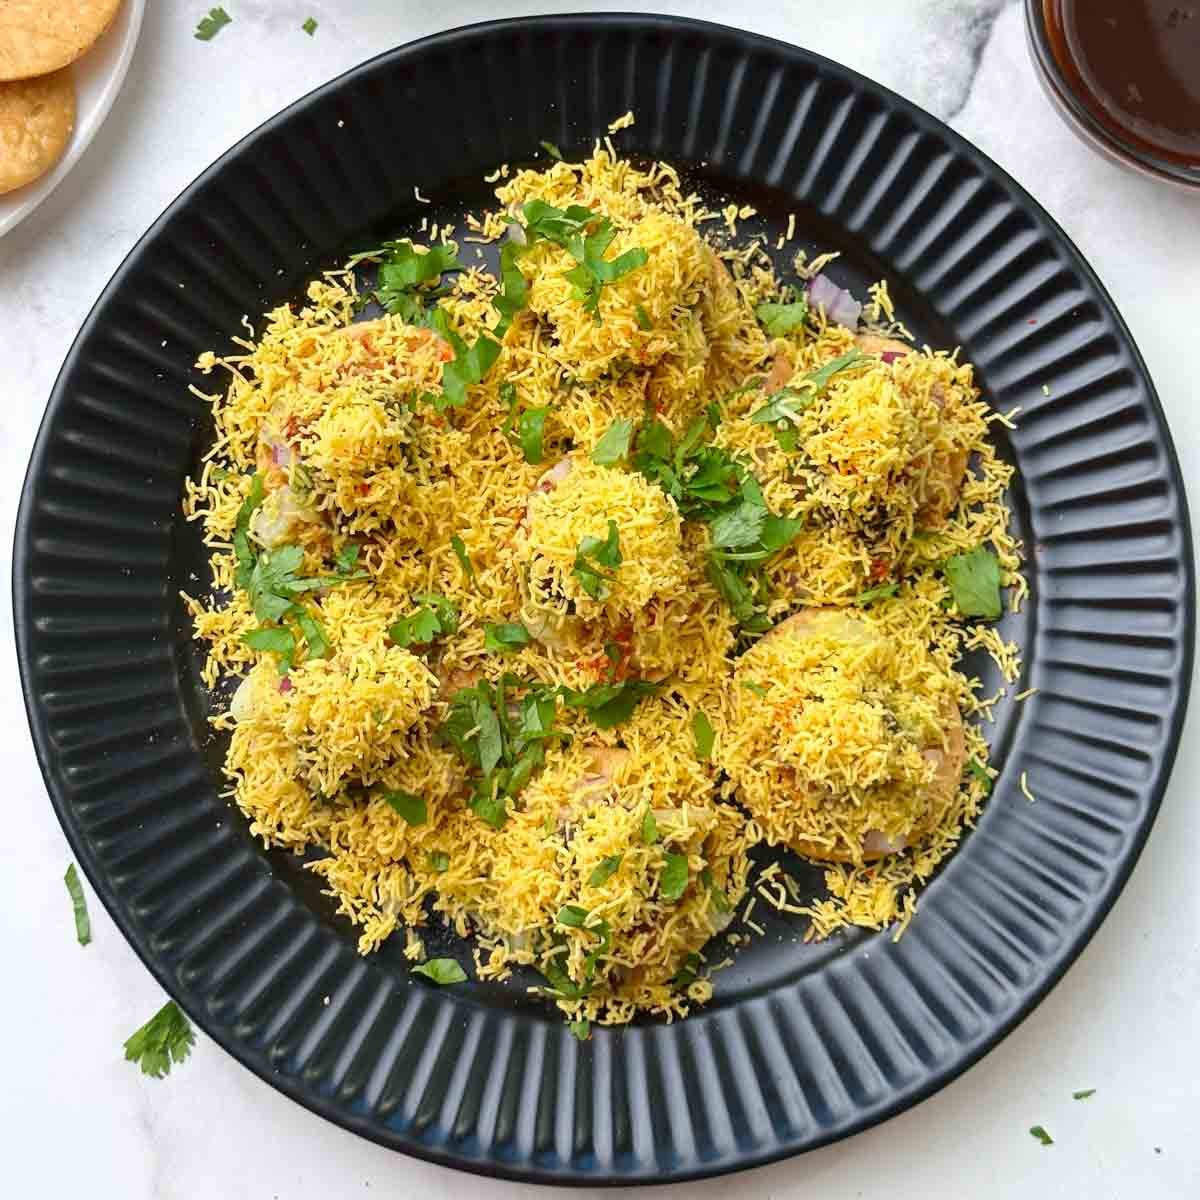 sev puri chaat served on a plate with sev and chutneys on the side